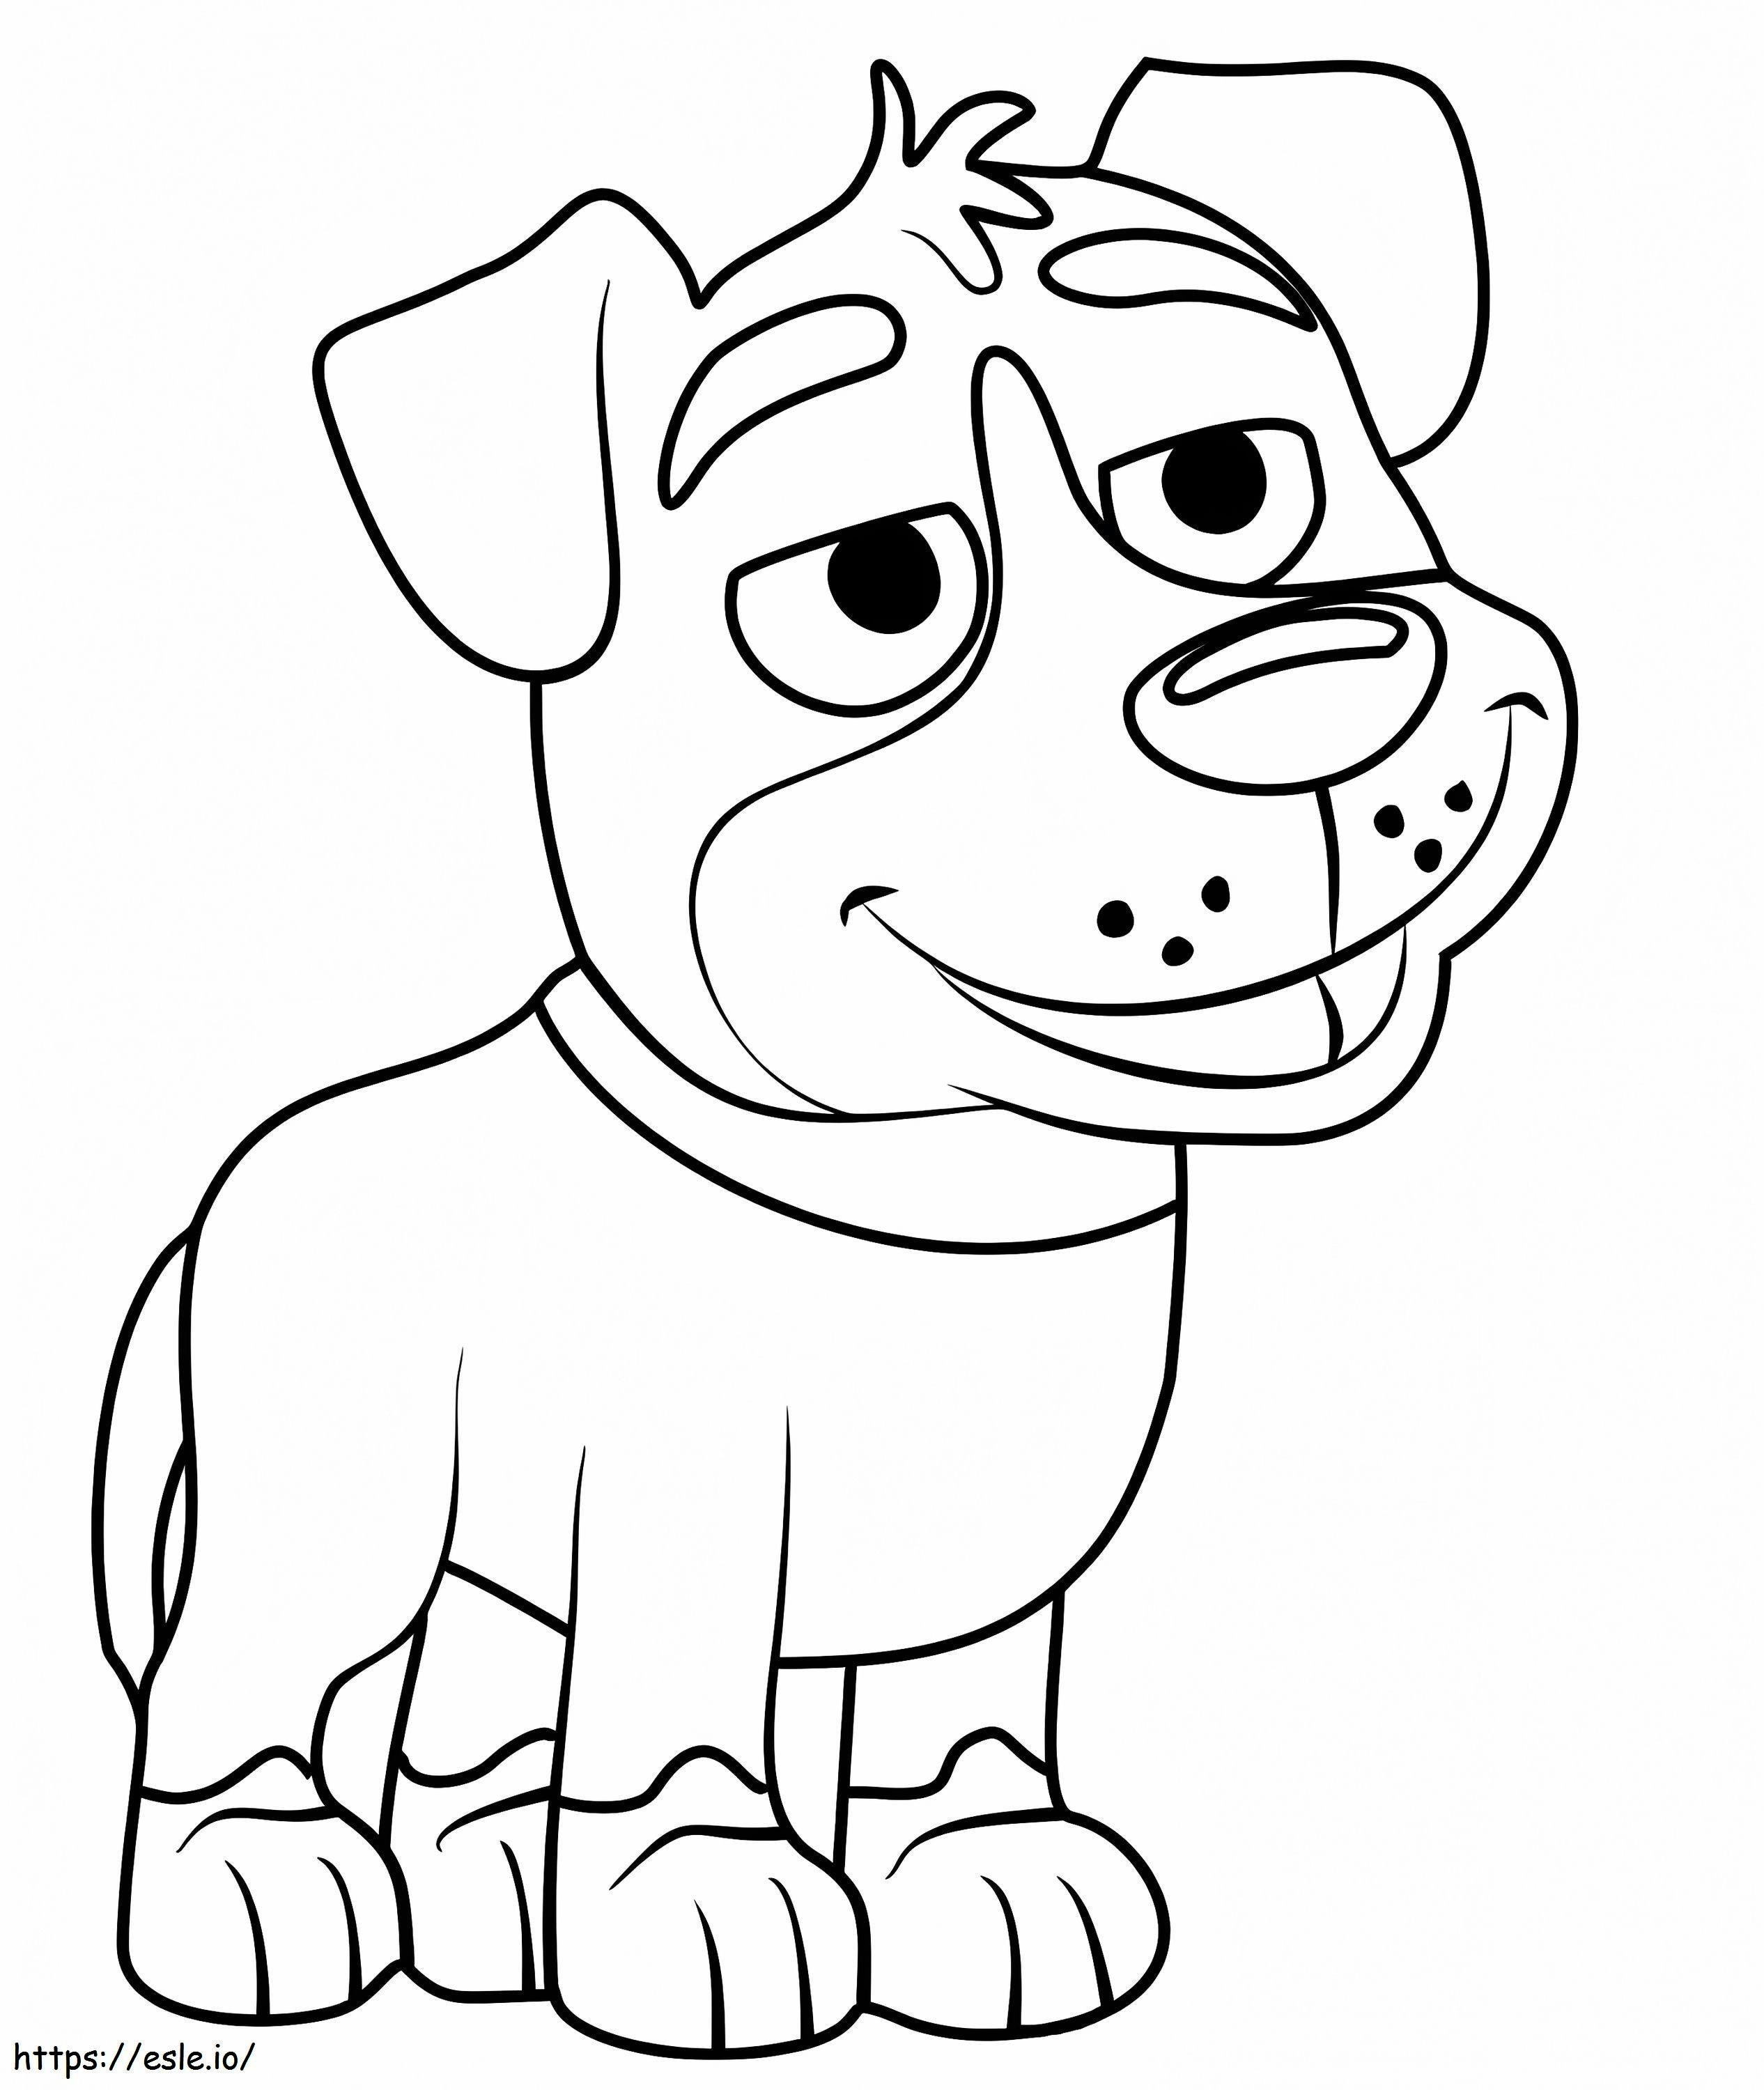 Taboo From Pound Puppies coloring page